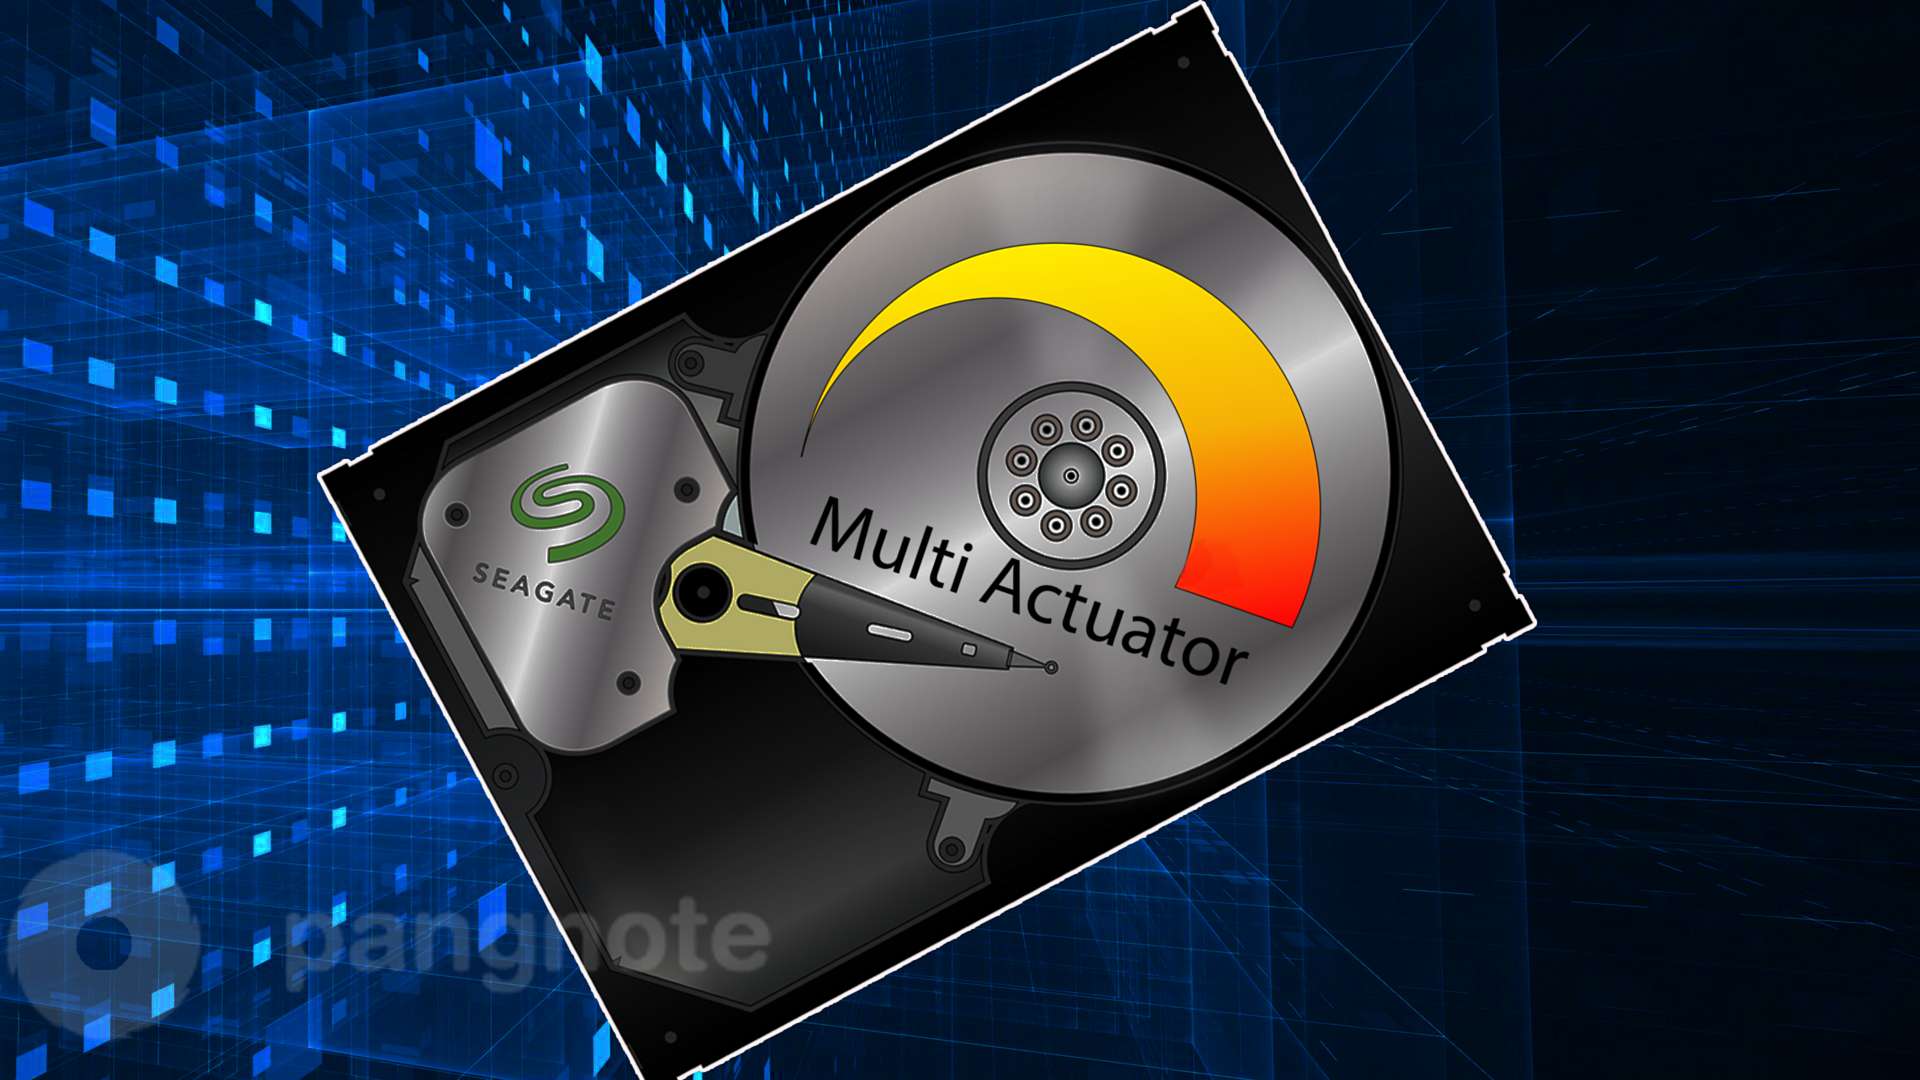 Multi Actuator technology allows you to double the performance of HDD